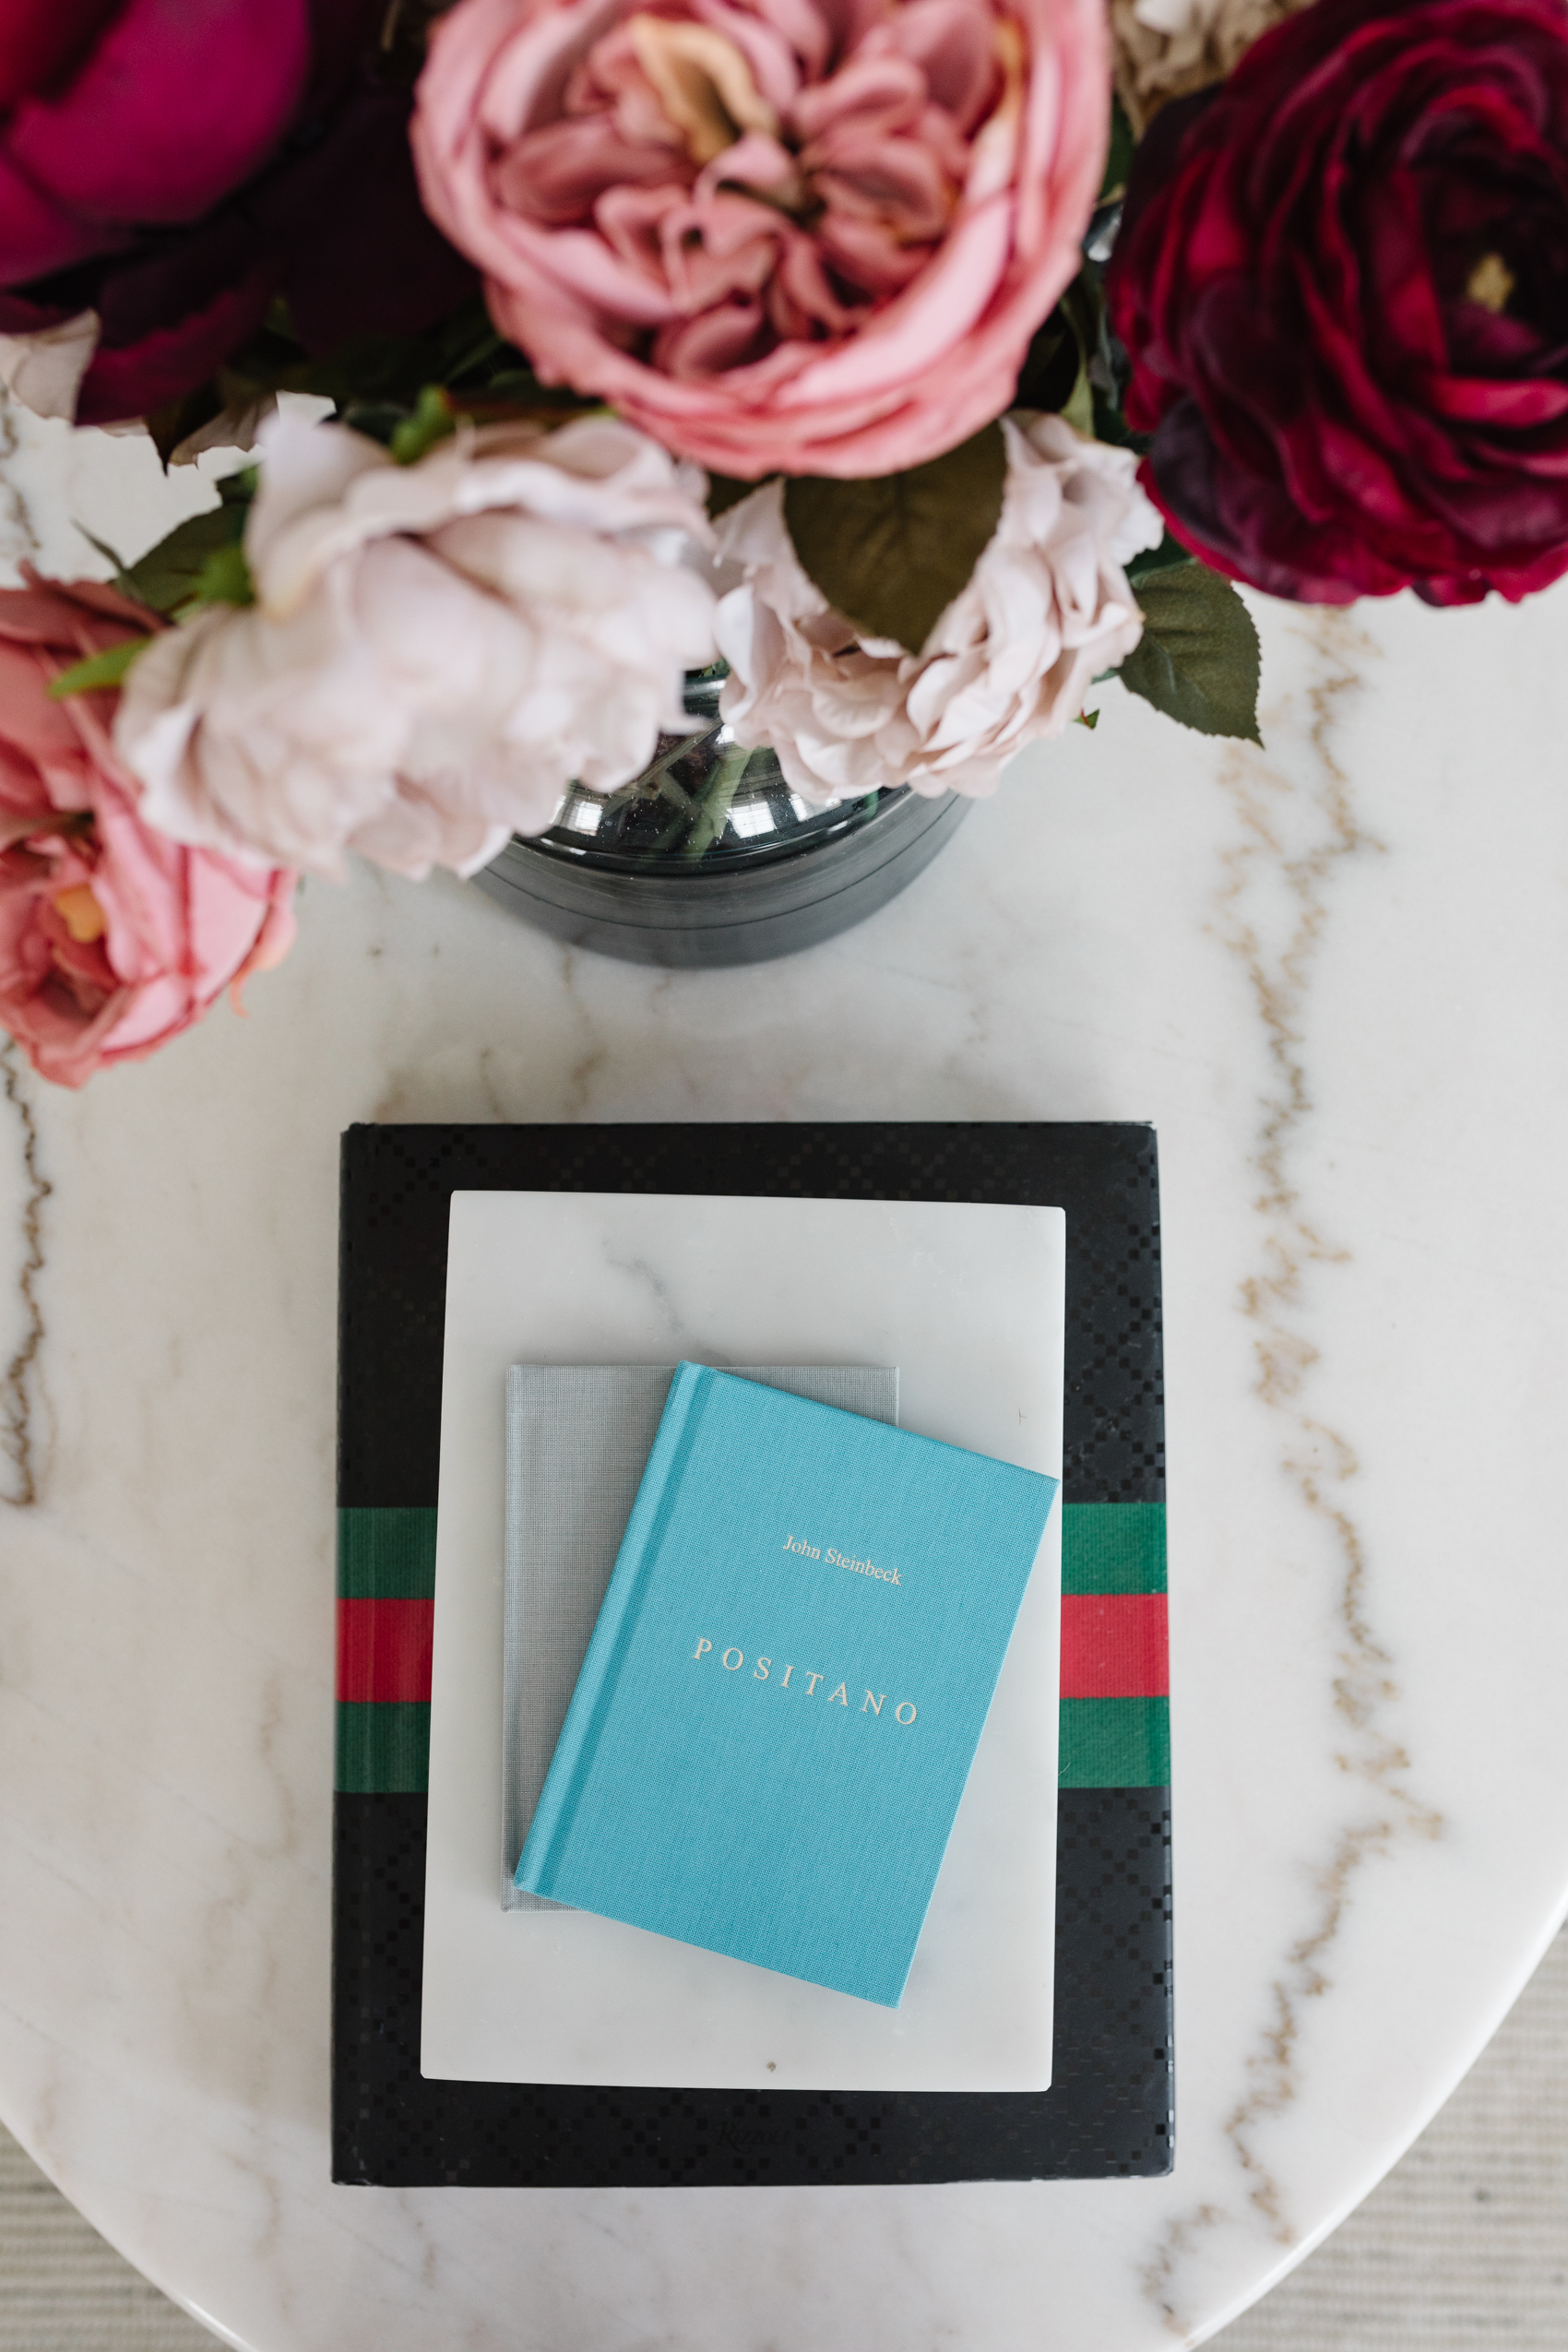 Positano by John Steinbeck linen bound book along with a white marble box to store knick knacks, Gucci book and a faux floral arrangement for coffee table styling.